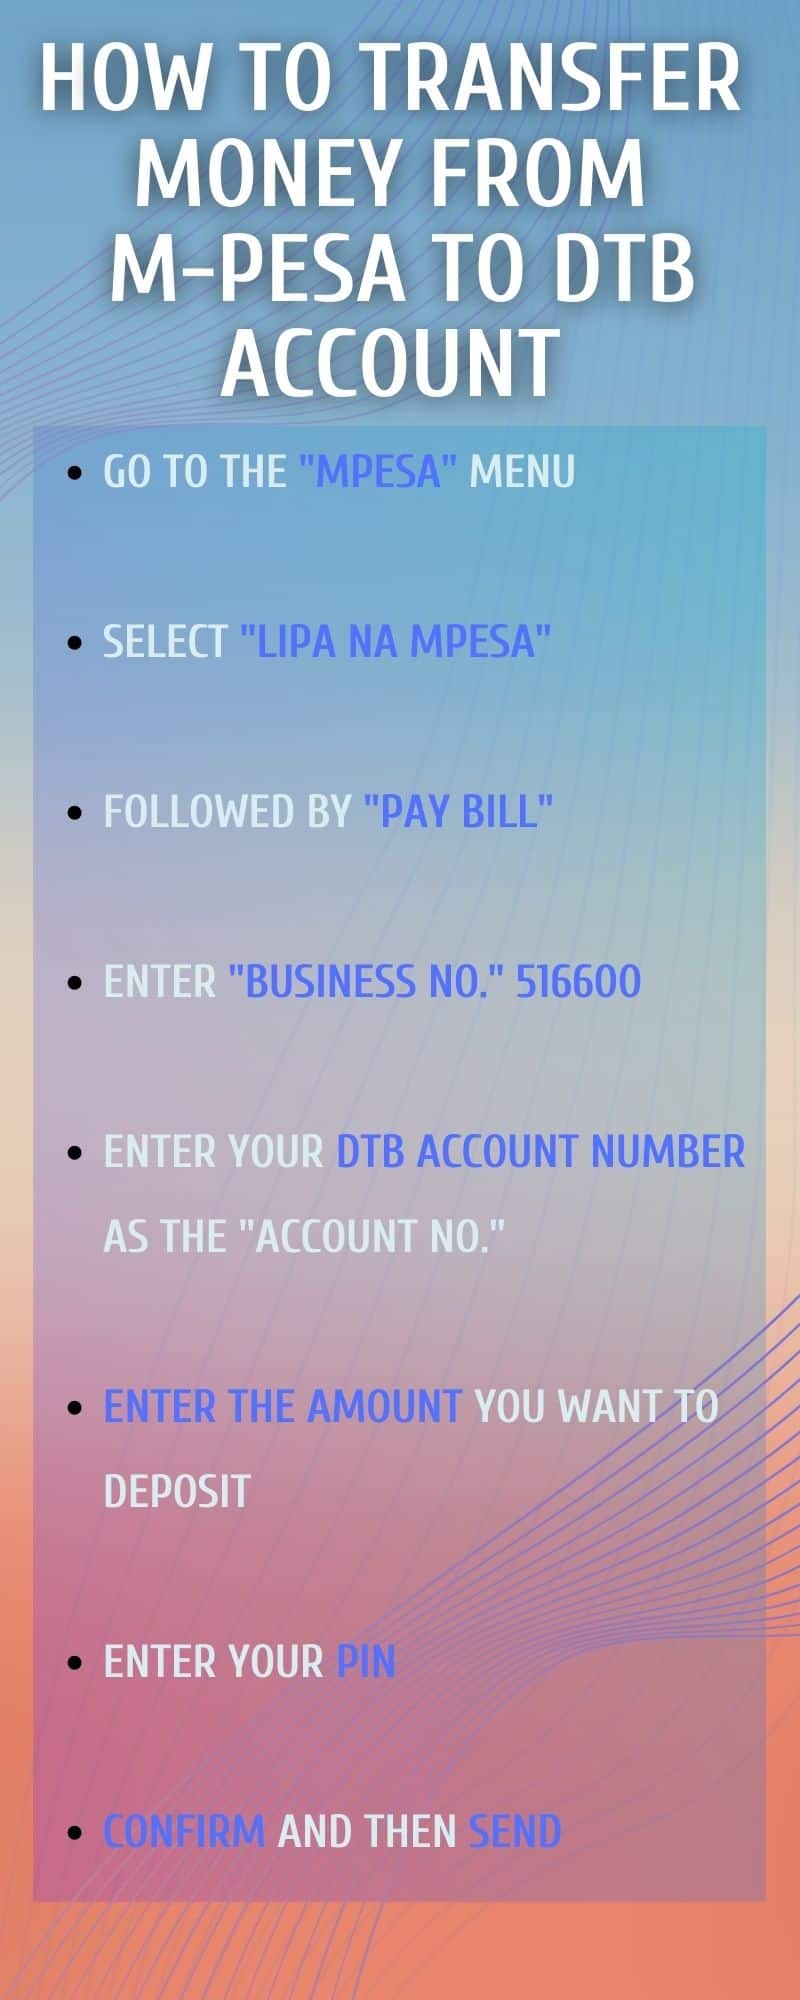 How to transfer money from M-Pesa to DTB account